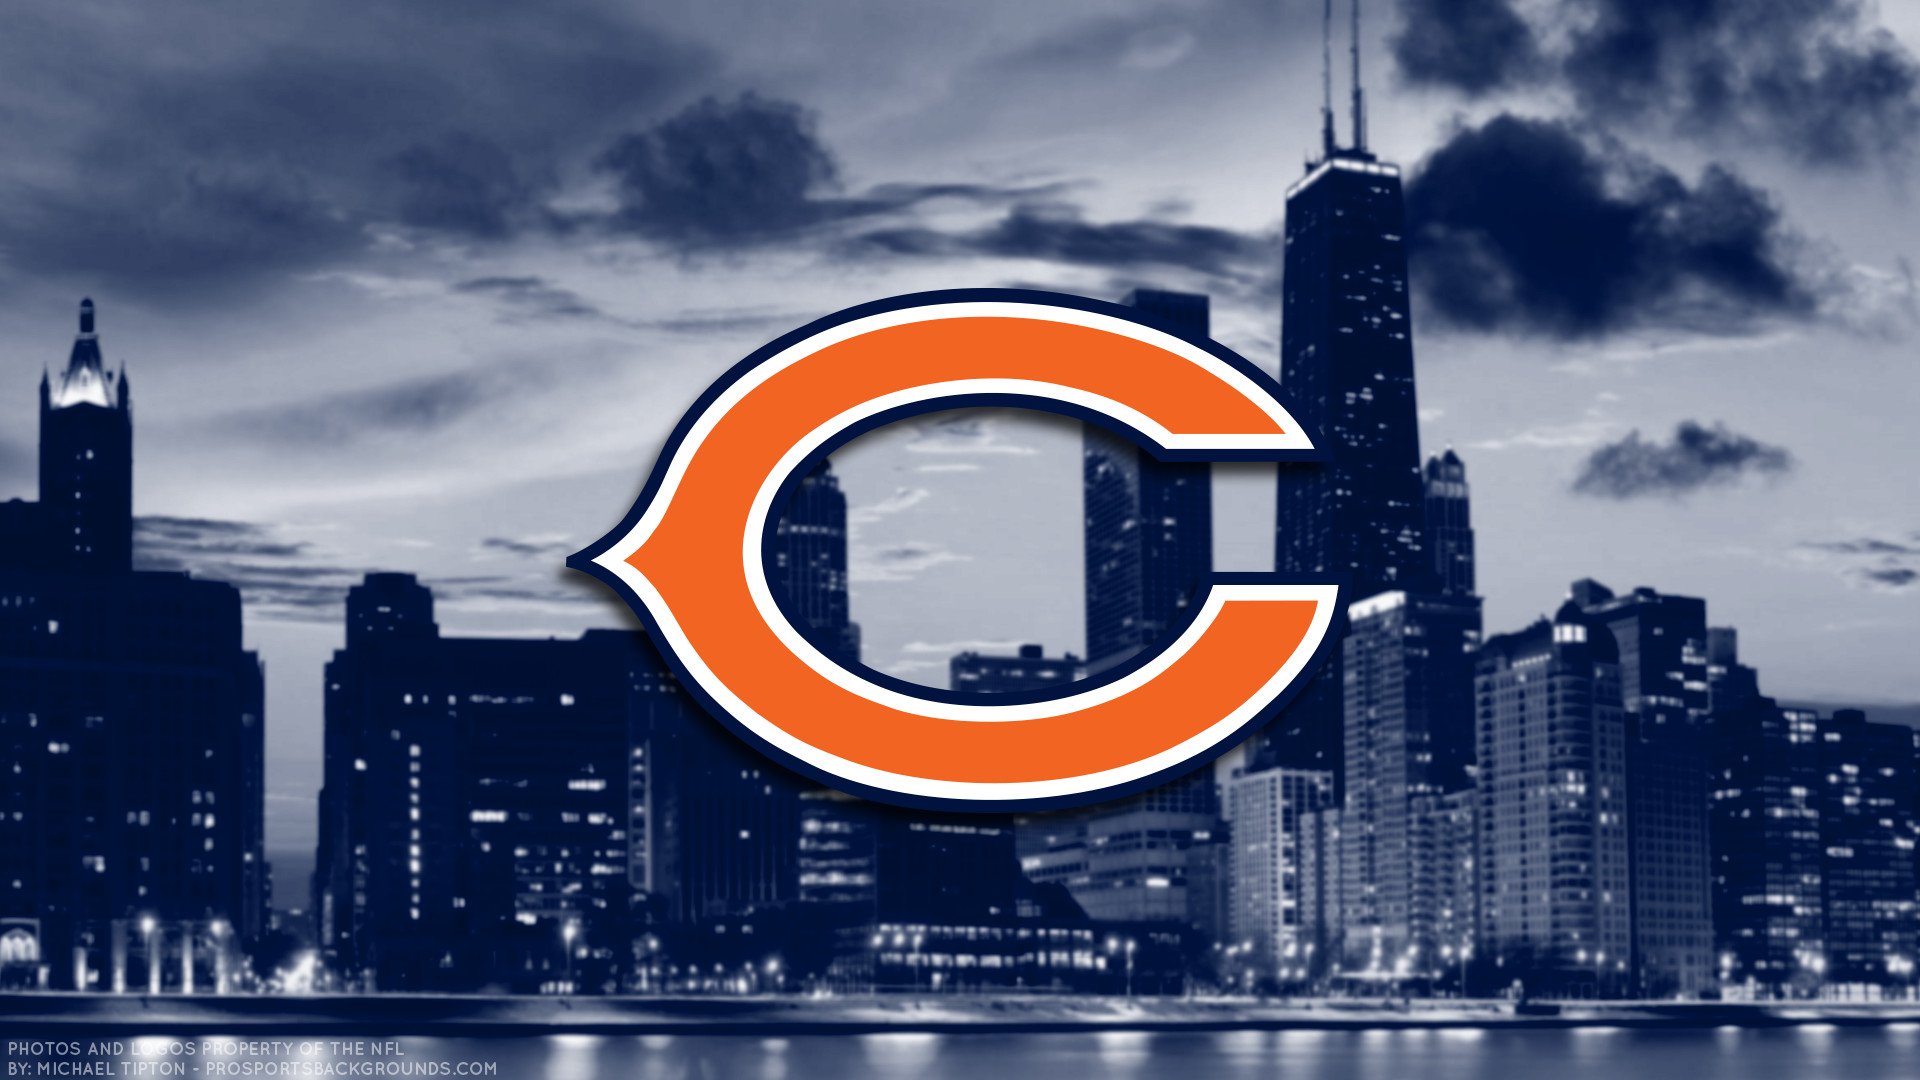 1920x1080 Chicago Bears wallpapers and Pictures download free | HD Wallpapers |  Pinterest | Hd wallpaper and Wallpaper